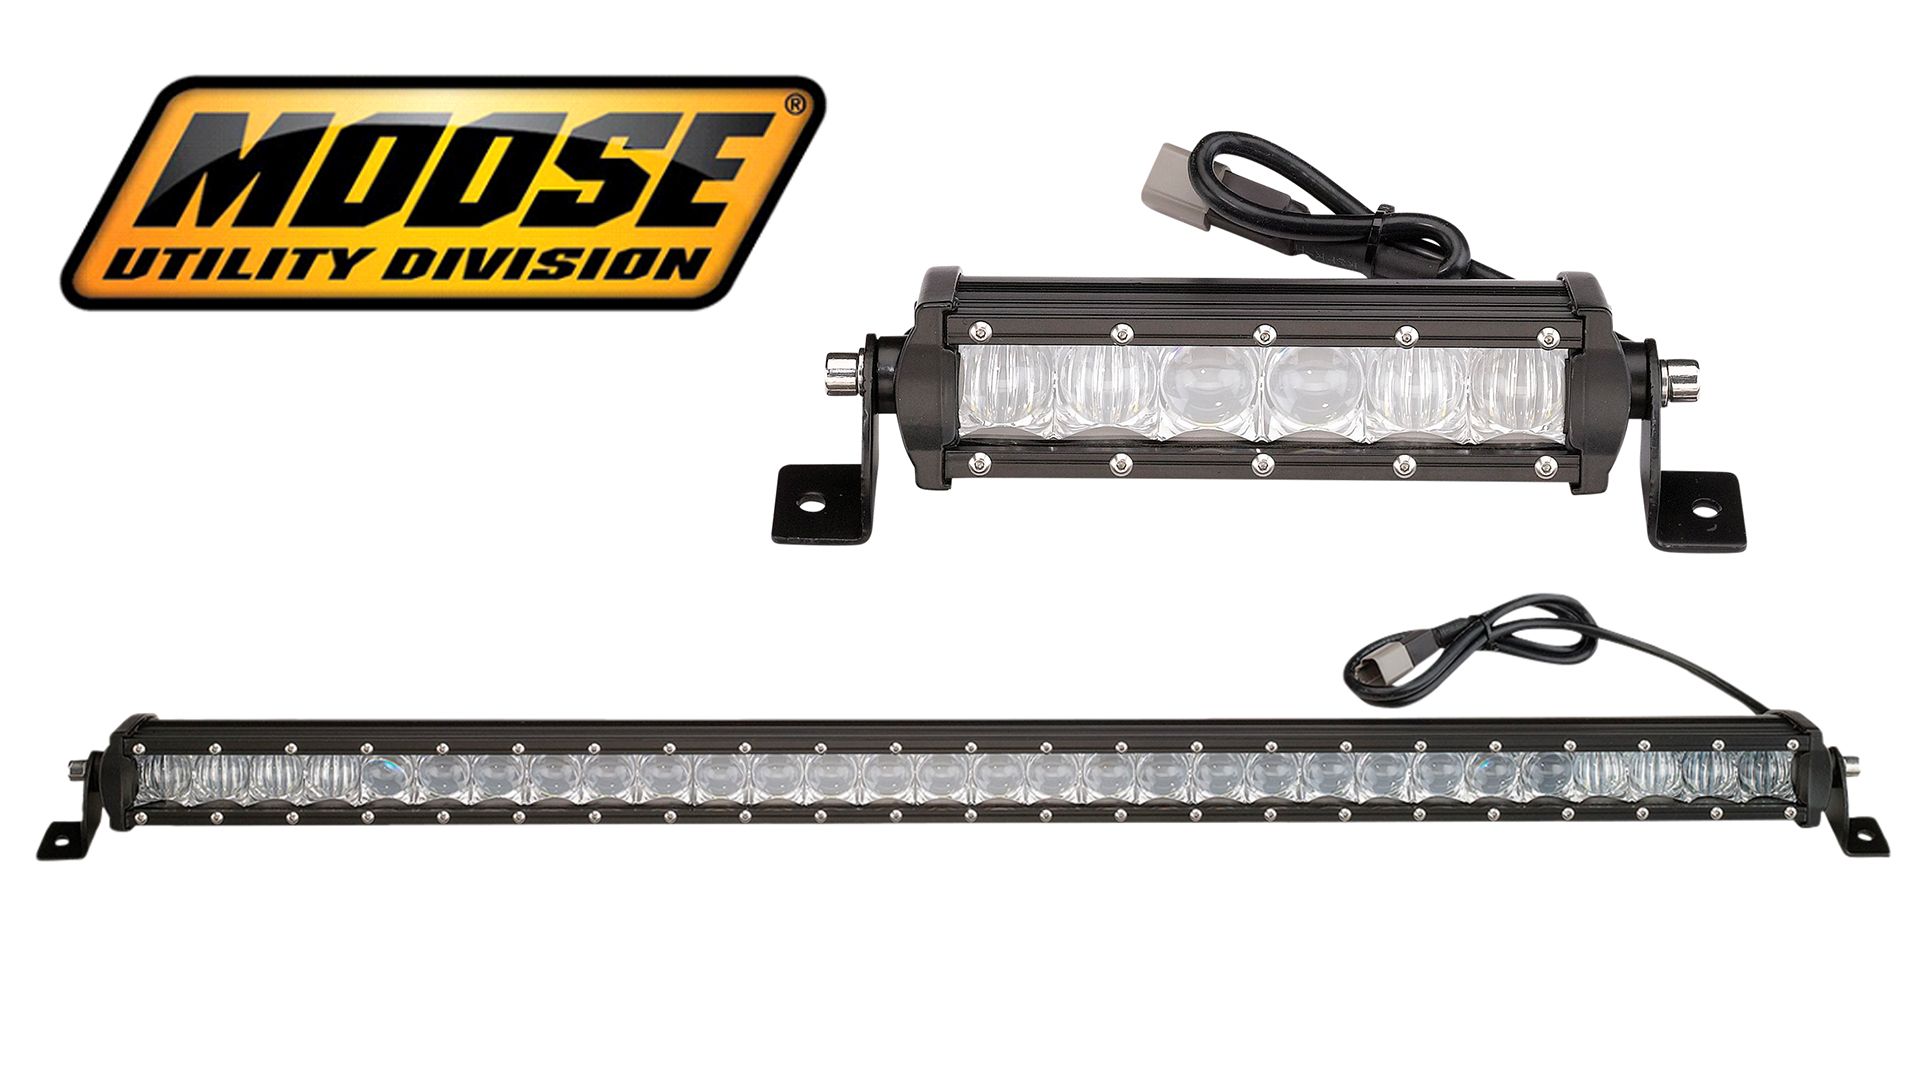 Moose Utility Division Introduces New Led Light Bars